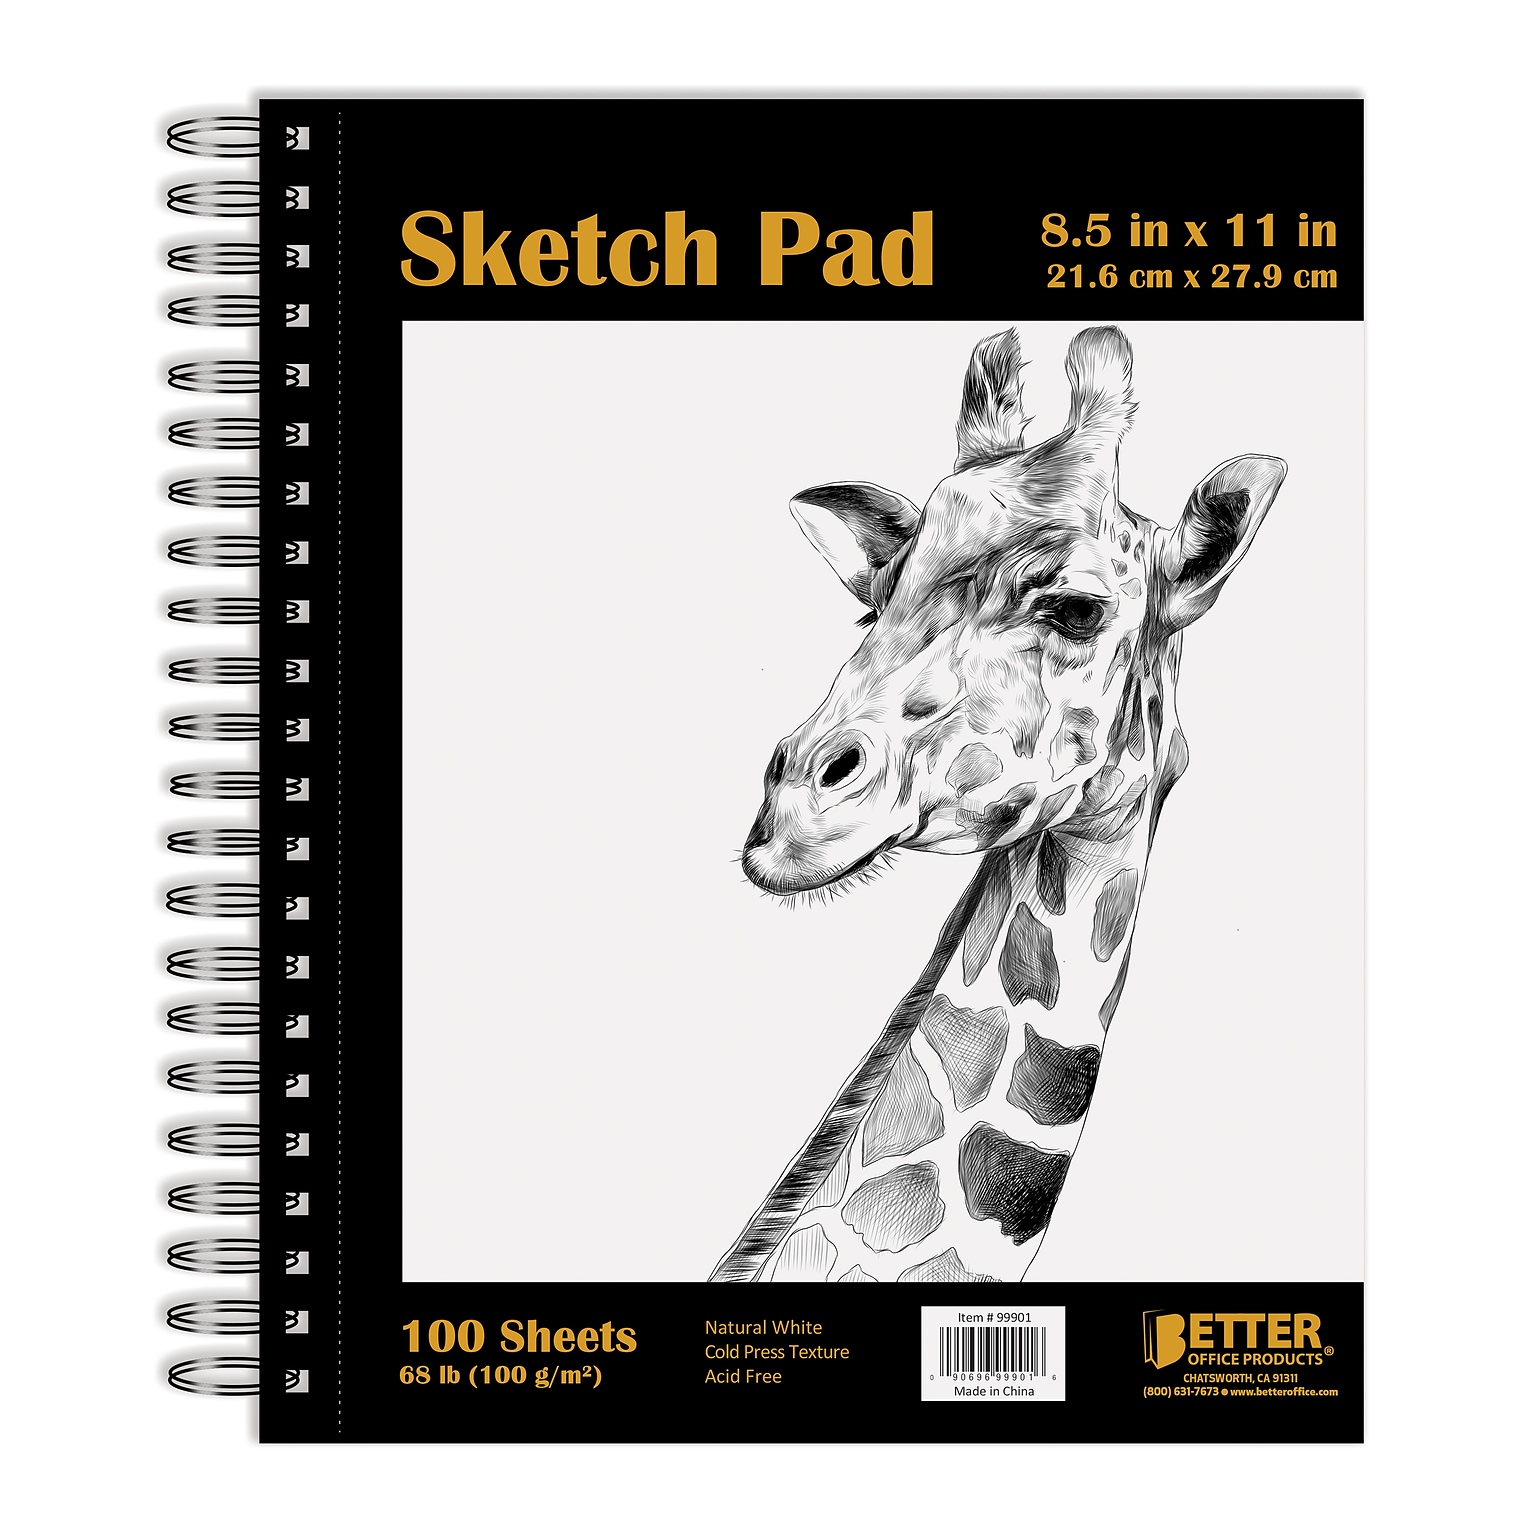 Better Office Products Artist Sketch Book, Spiral Bound,  8.5 x 11, Premium Paper, 100 Sheets (01302)